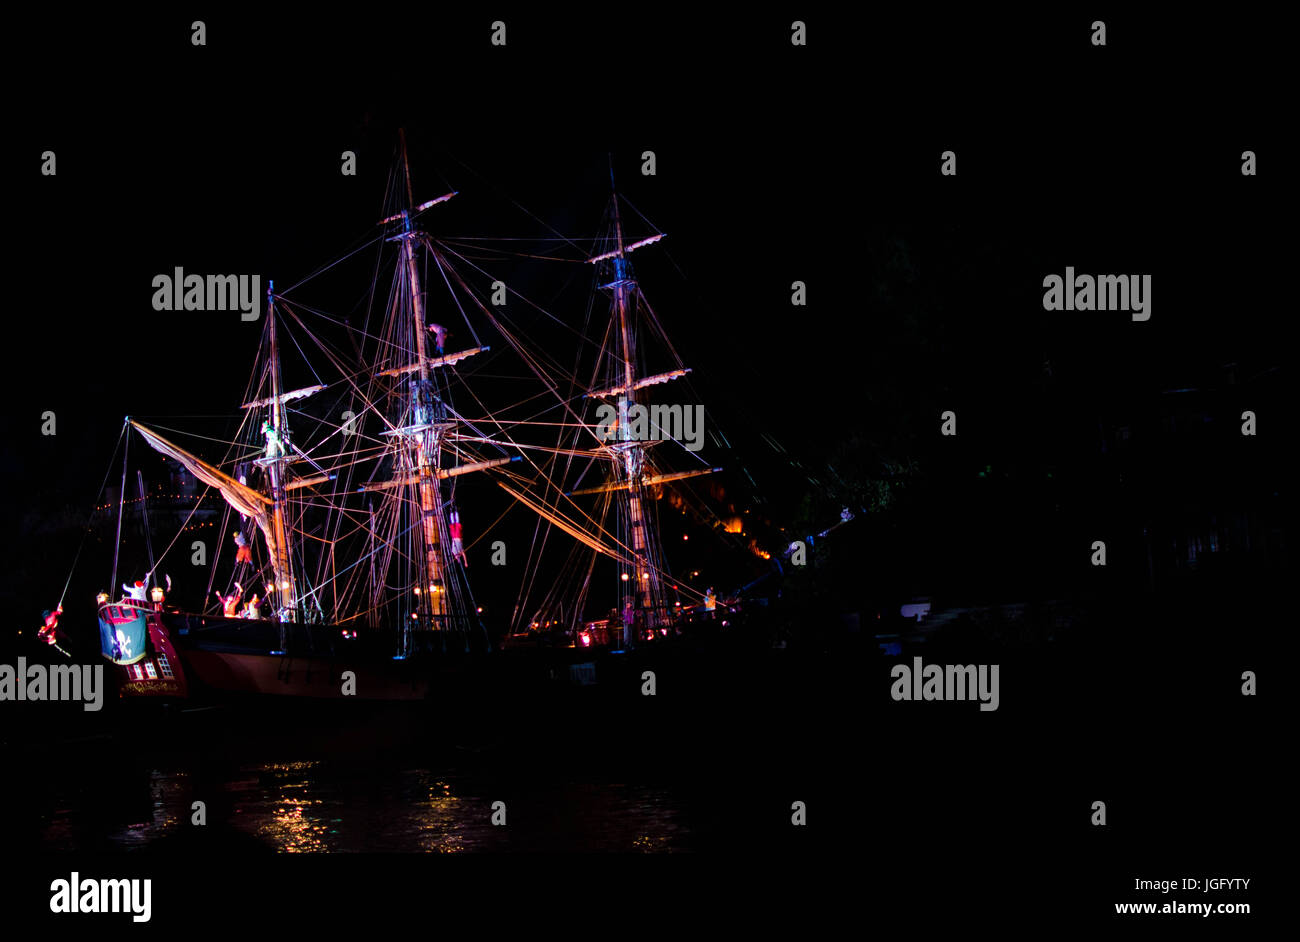 Pirate ship stage during a show Stock Photo